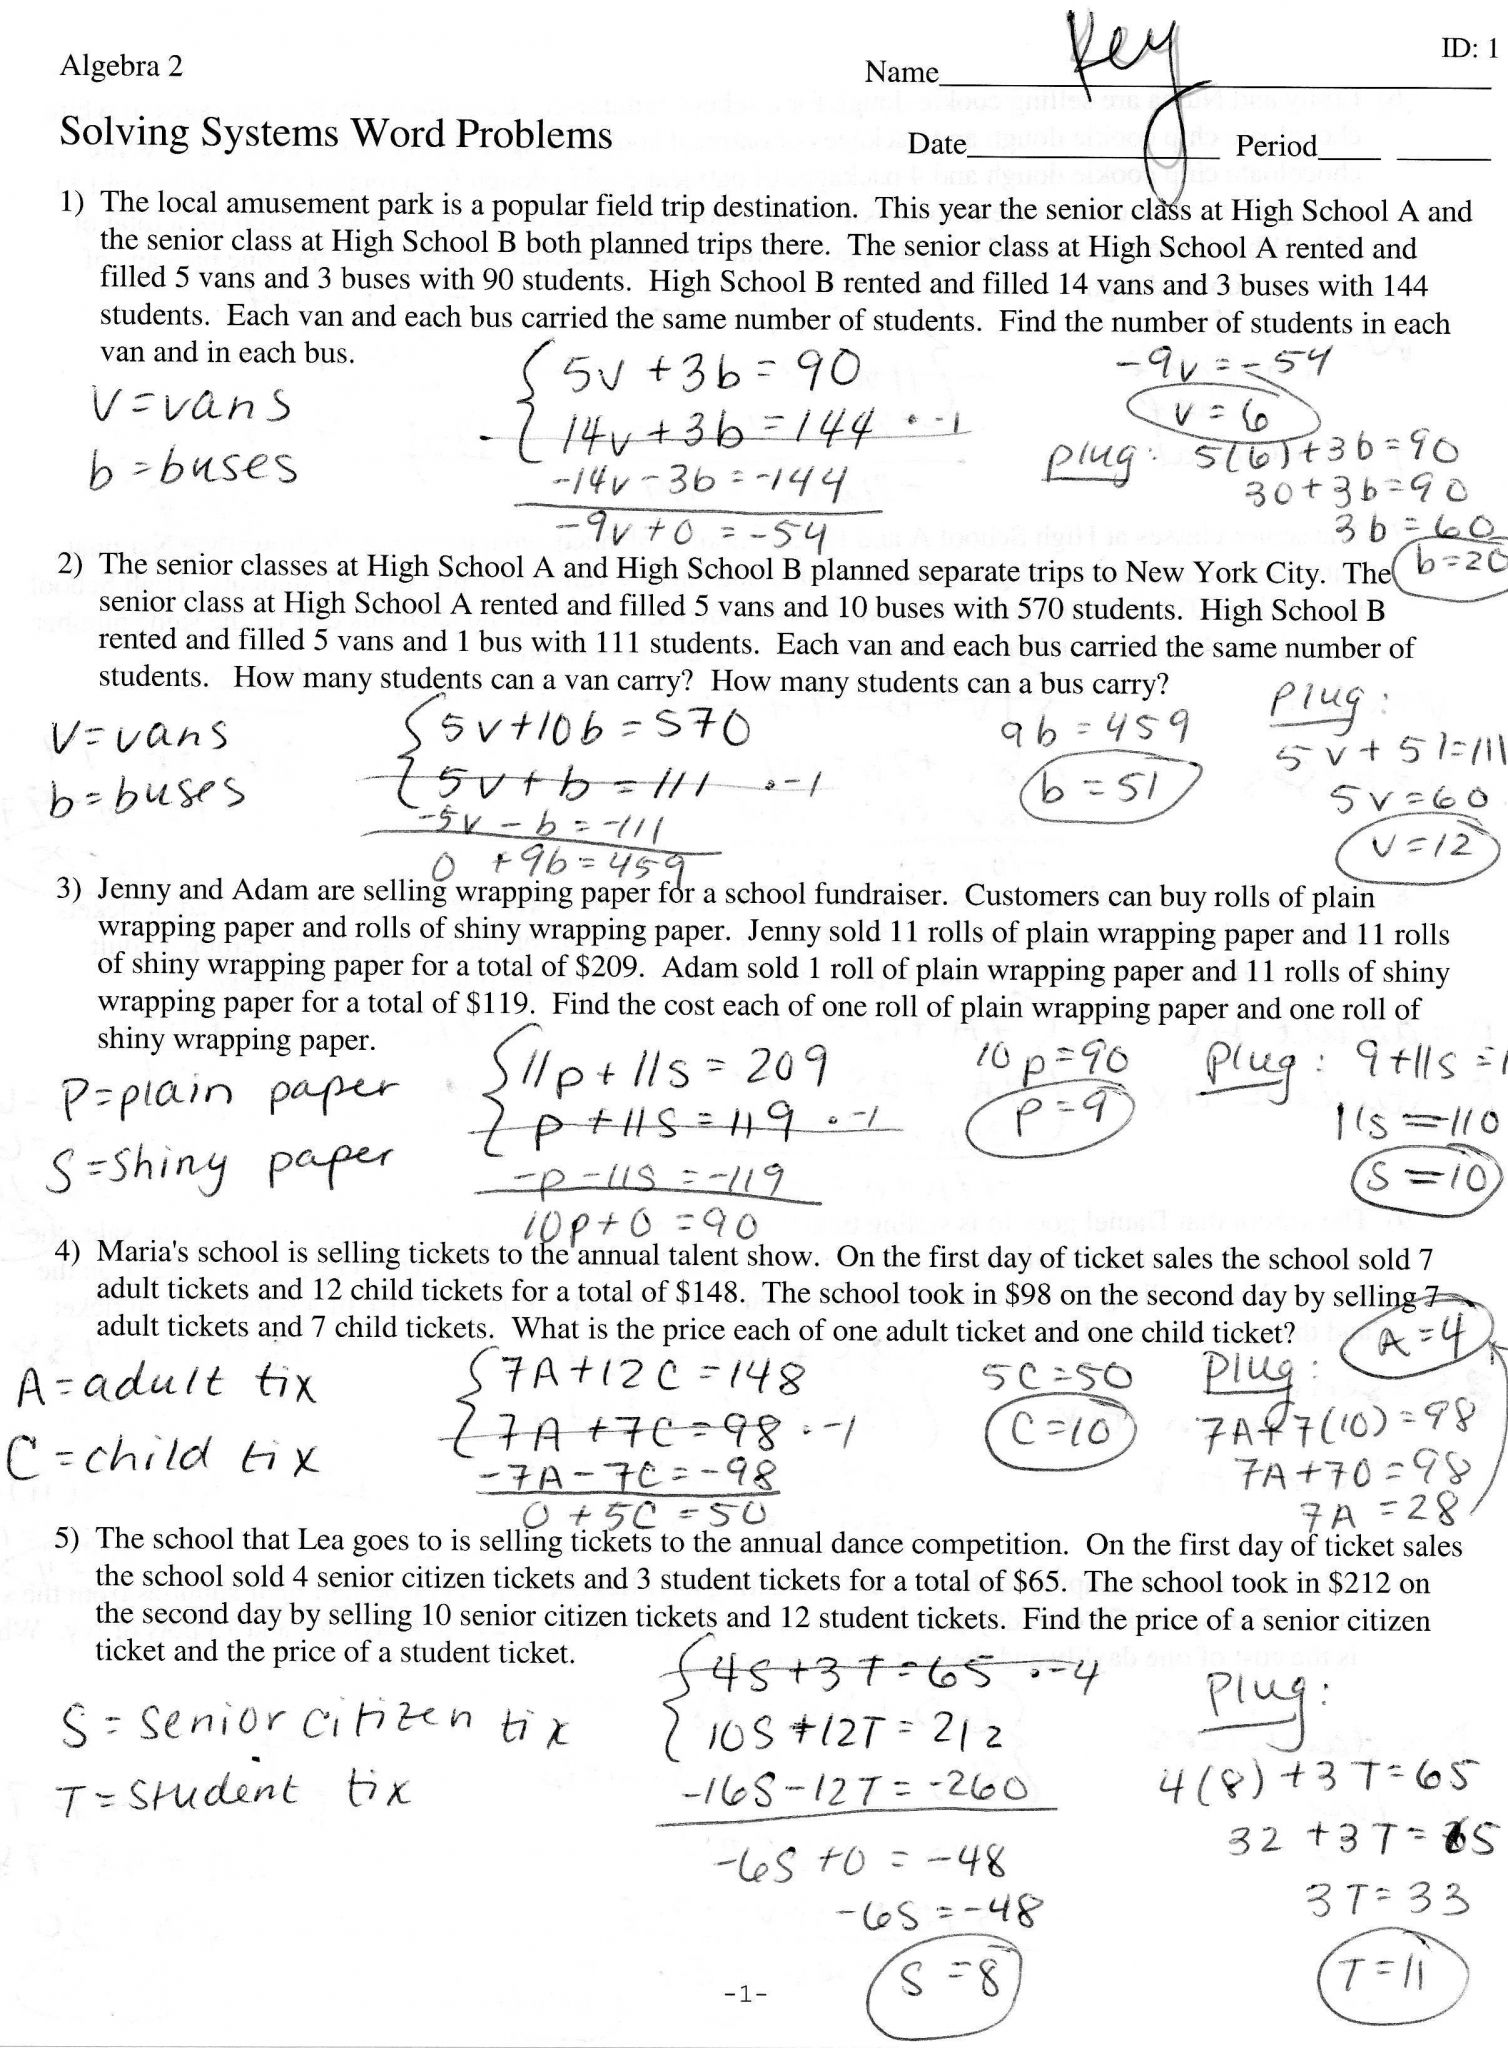 Compound Inequalities Worksheet Answers Also Inequality Word Problems Worksheet Algebra 1 Answers Fresh 46 Best